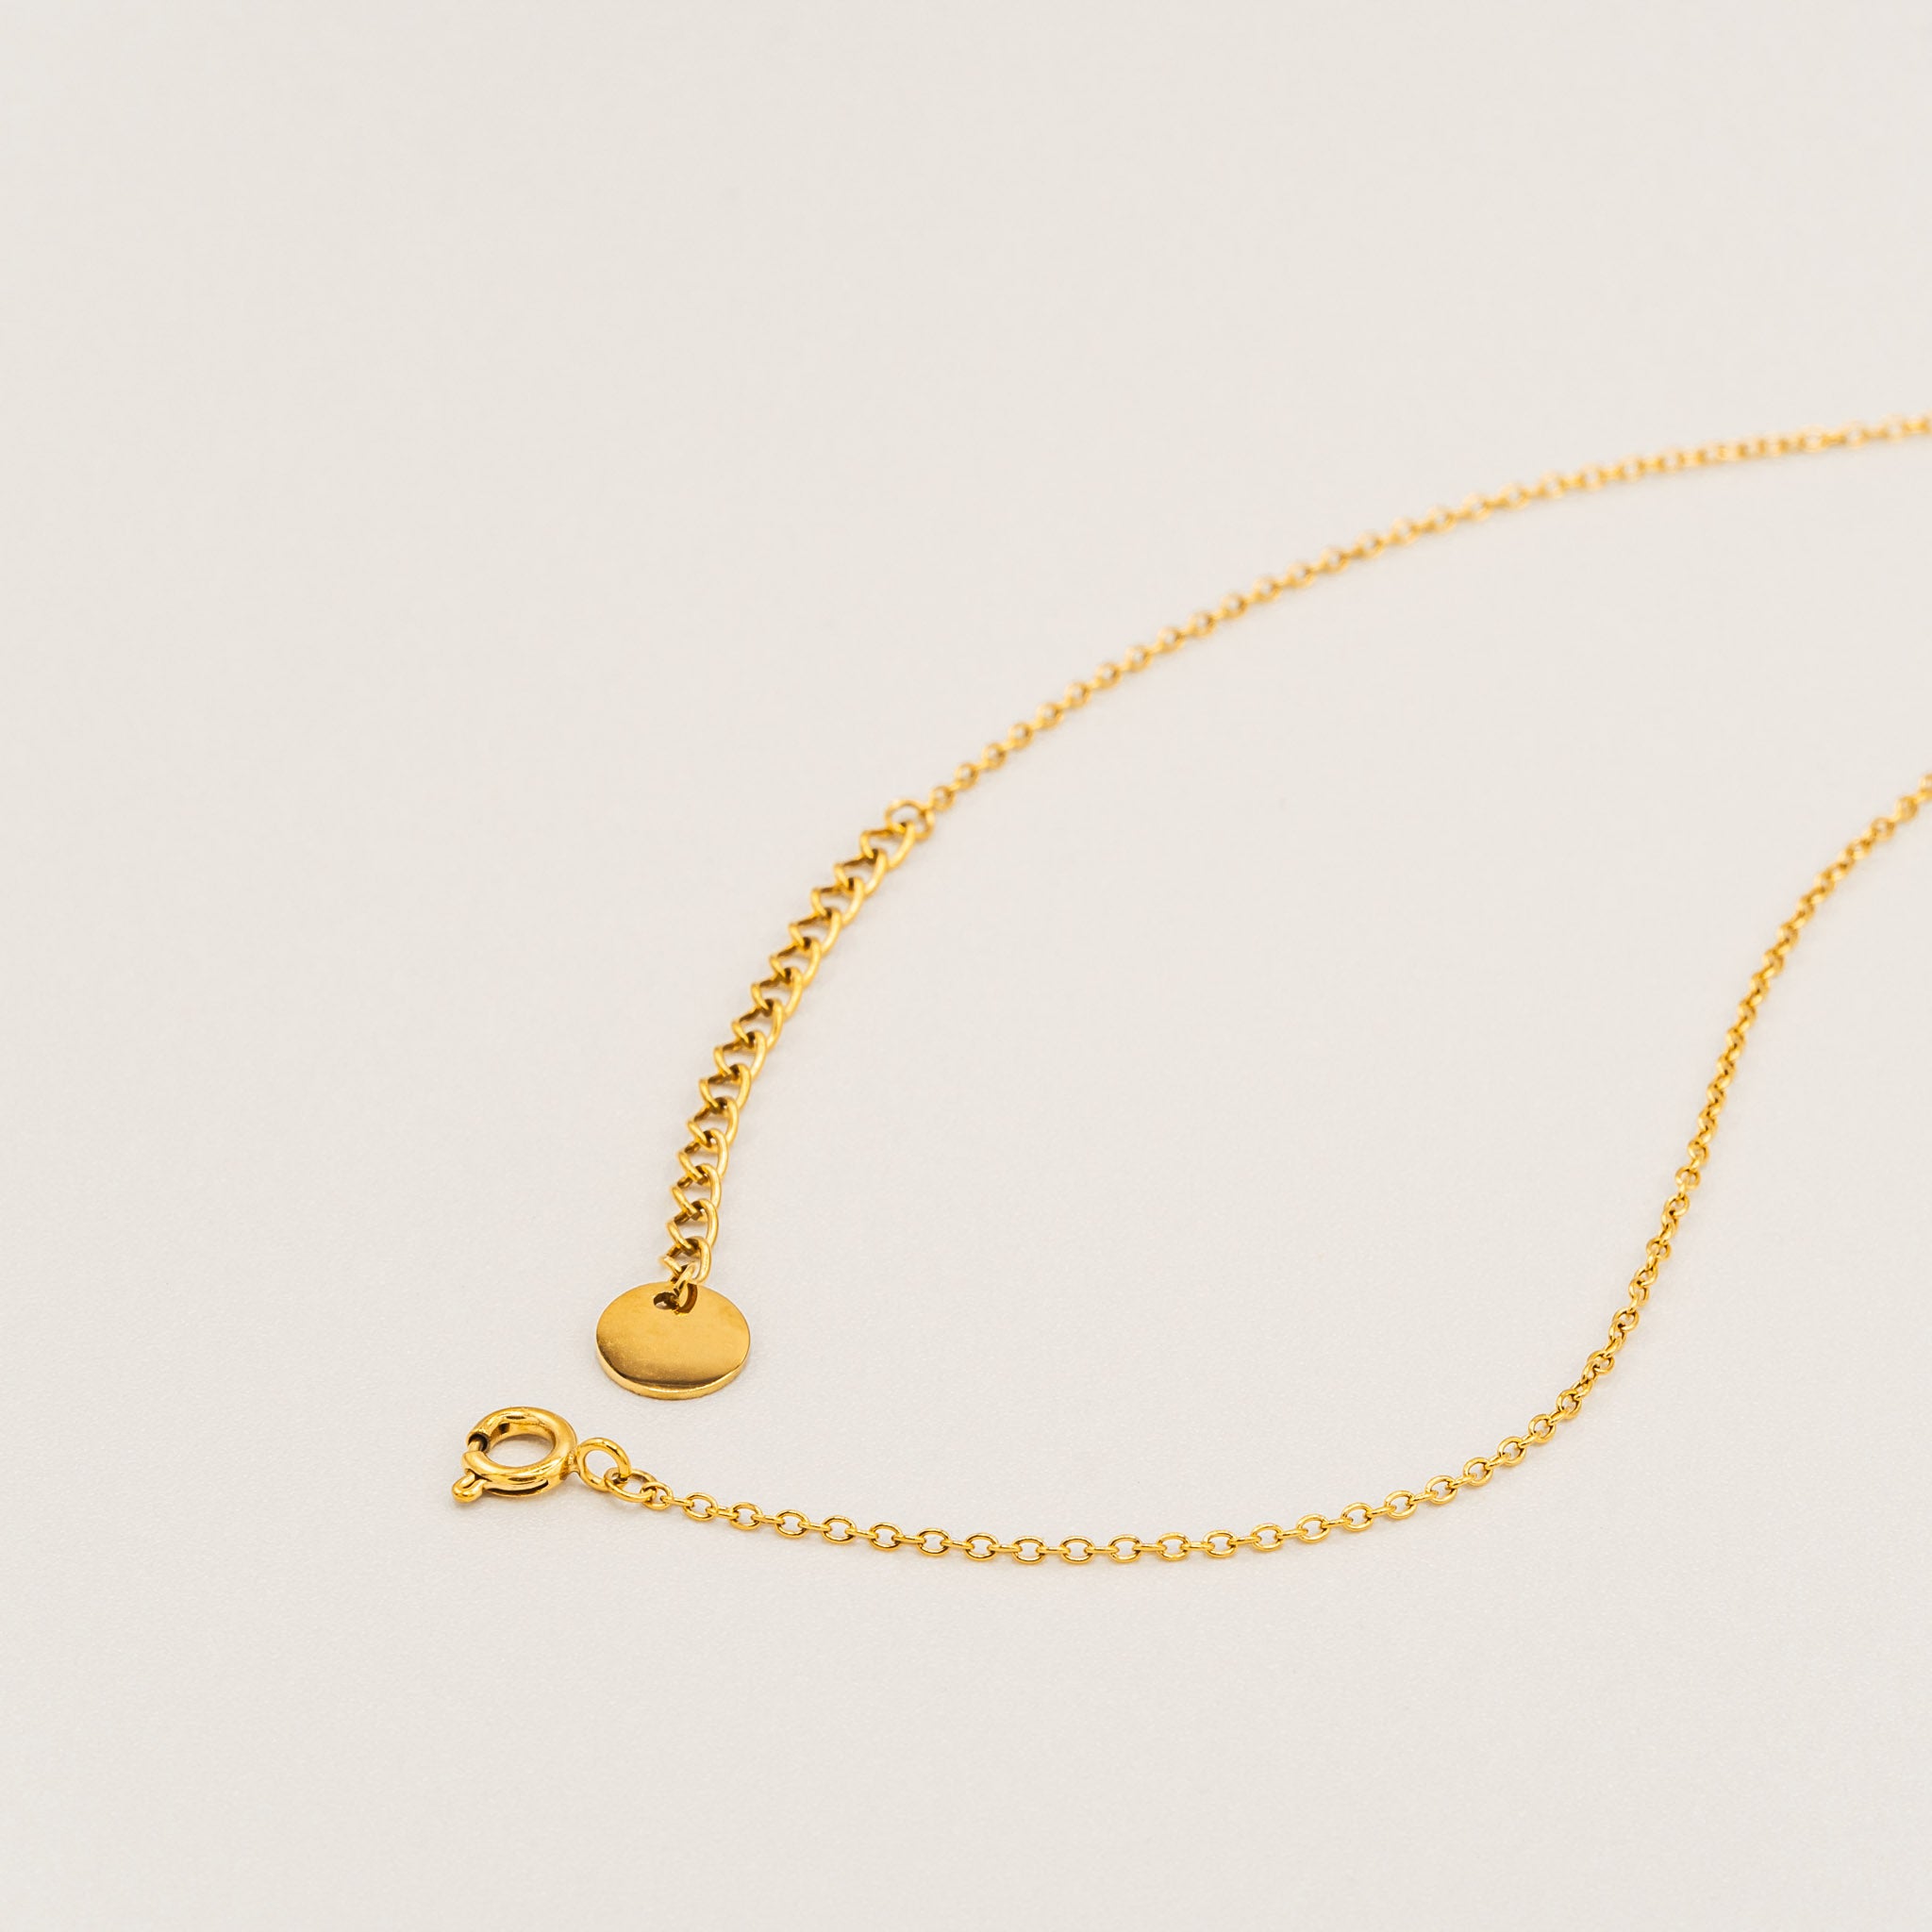 Waterdrop Necklace-Necklaces-Jessica Wang